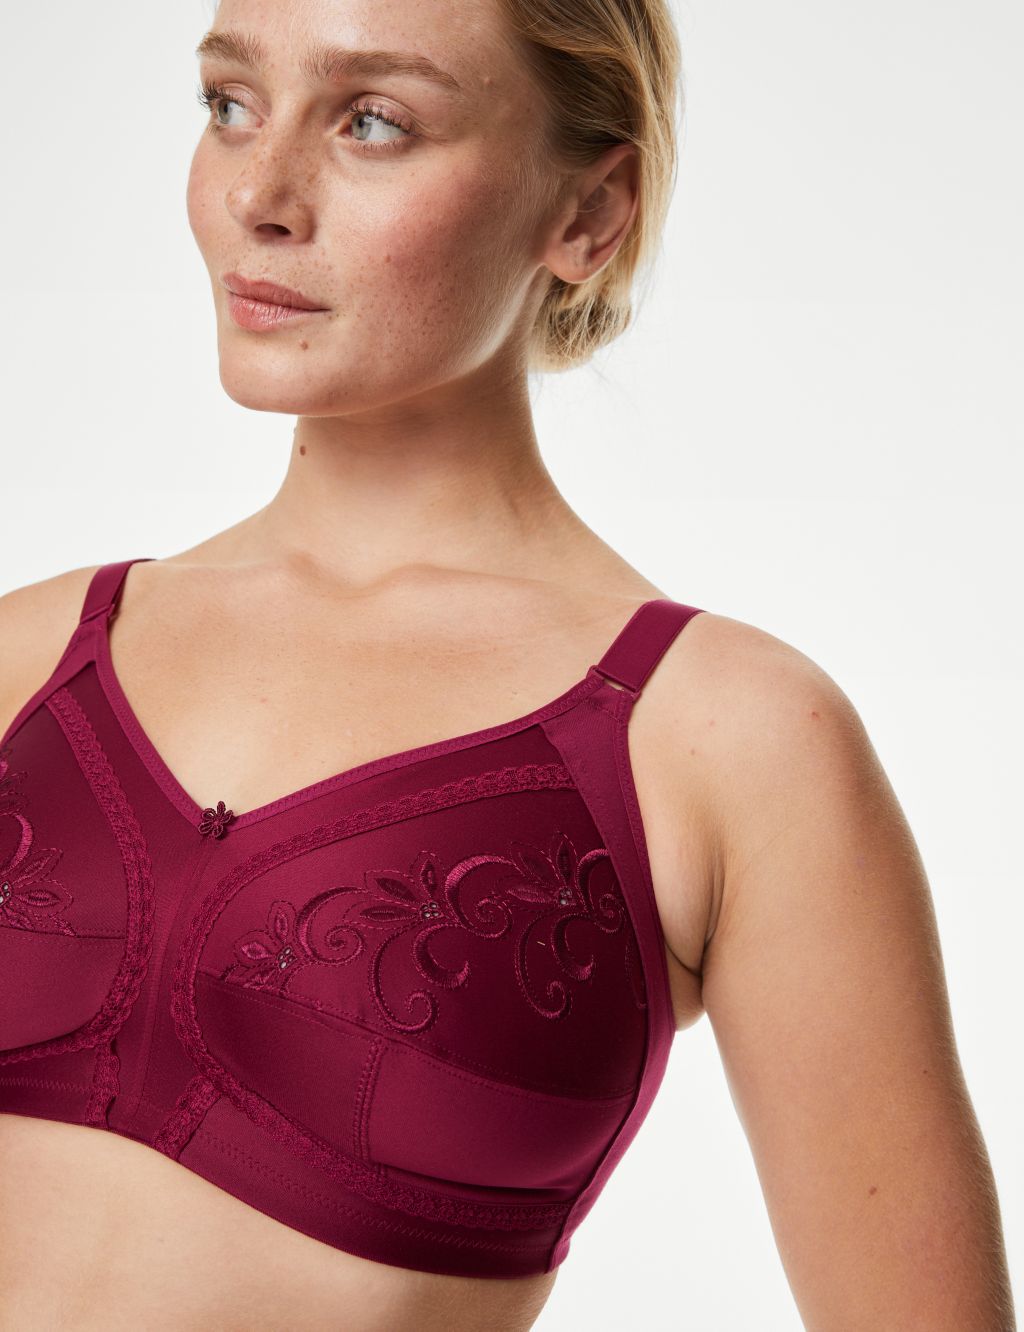 Total Support Embroidered Full Cup Bra DD-K image 1